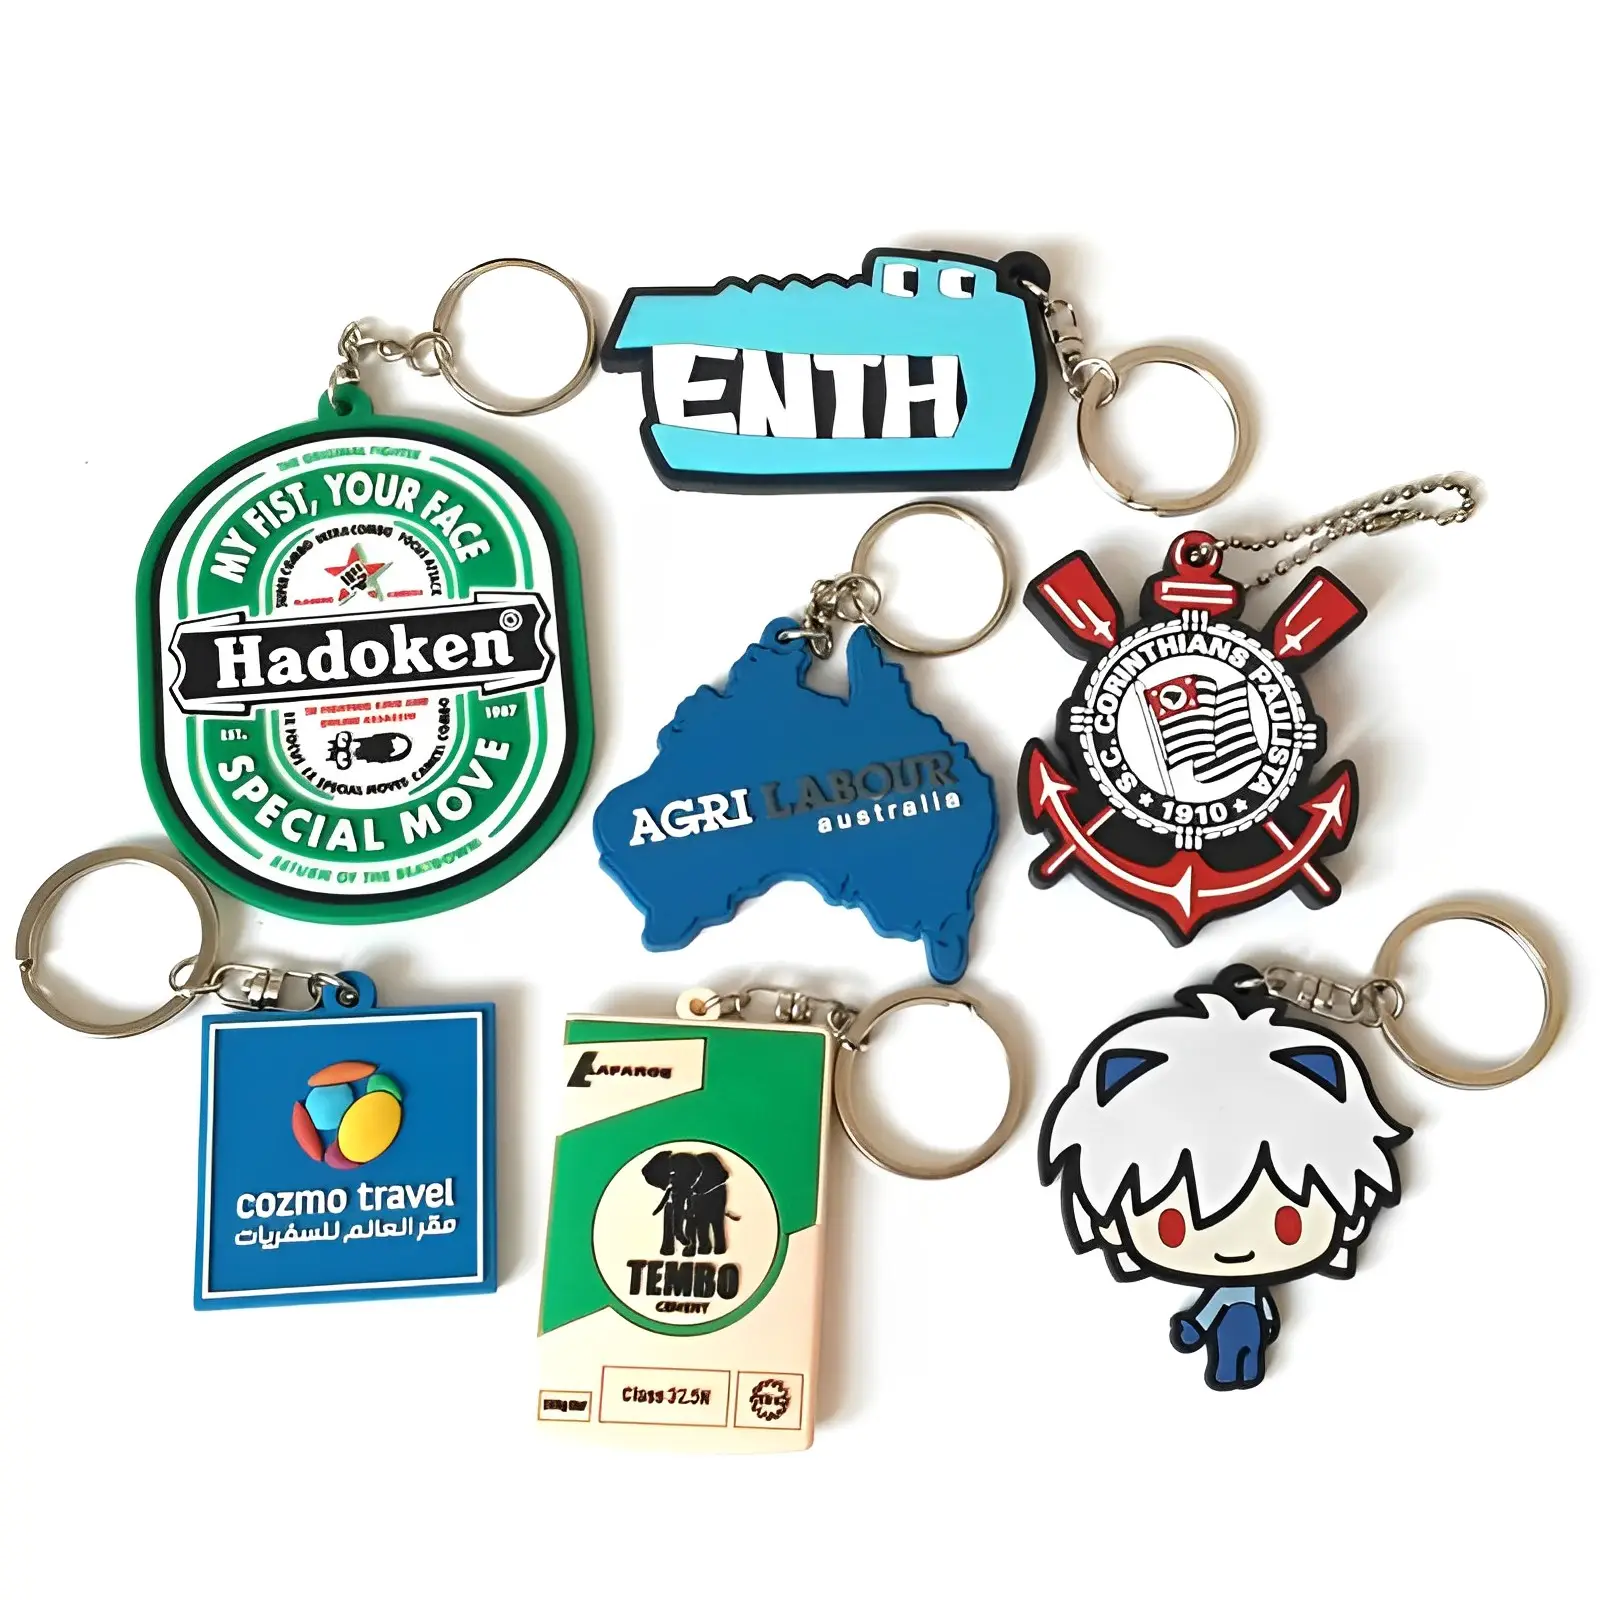 Promotional business gift for custom logo key chains 2d and 3d pvc keychains personalized key chain soft rubber custom keychain